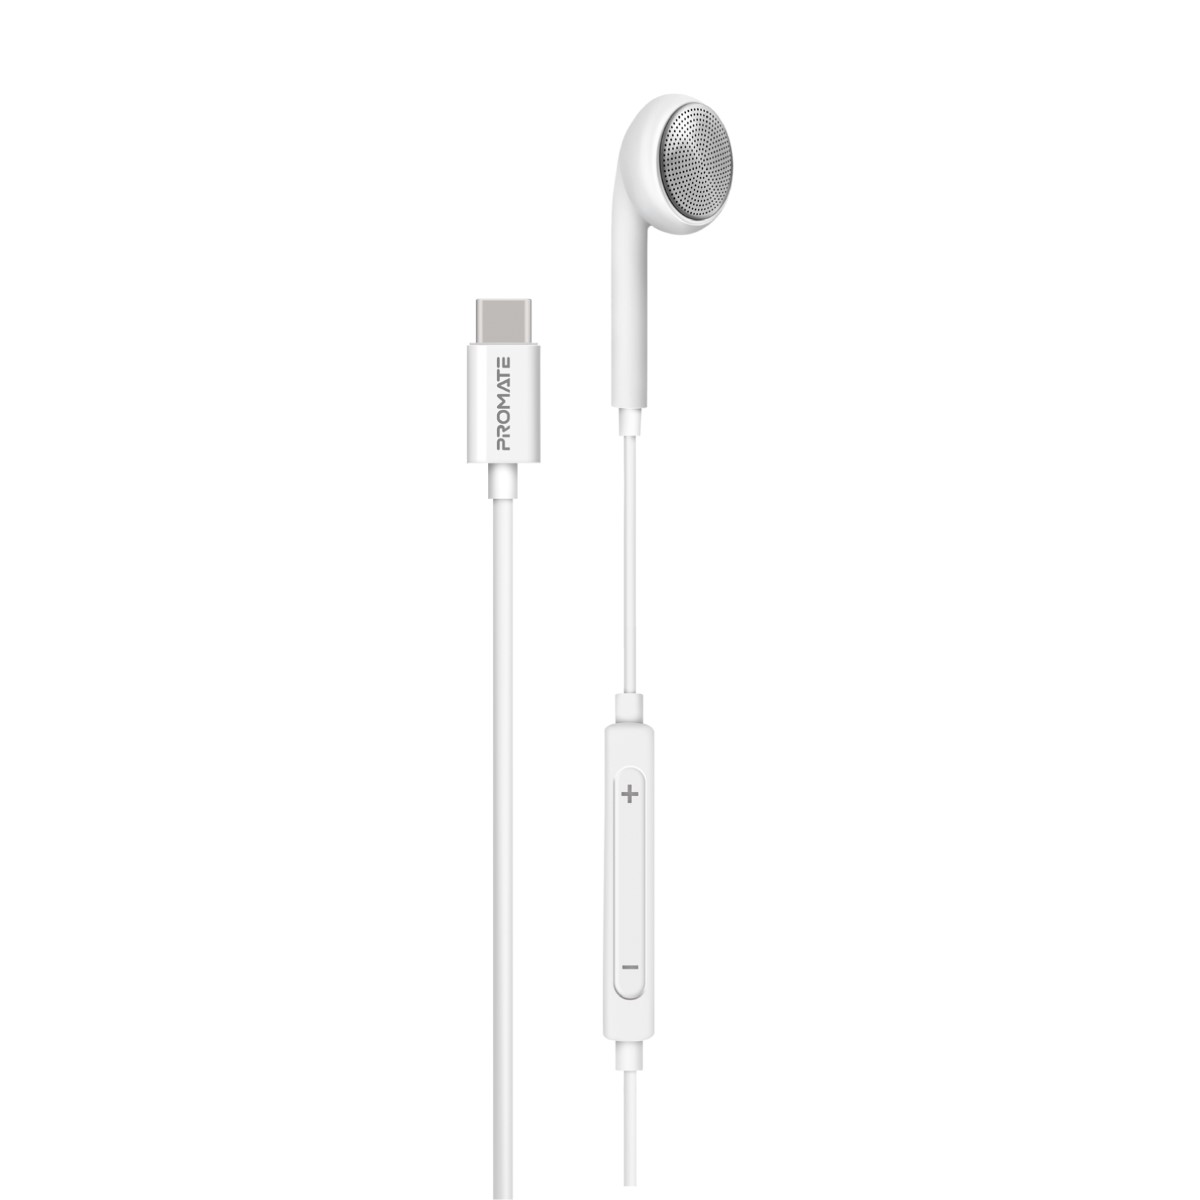 Promate USB-C Mono Earphone with Built-In Mic, Call Function and In-Line Button Controls, Lingo-C.White